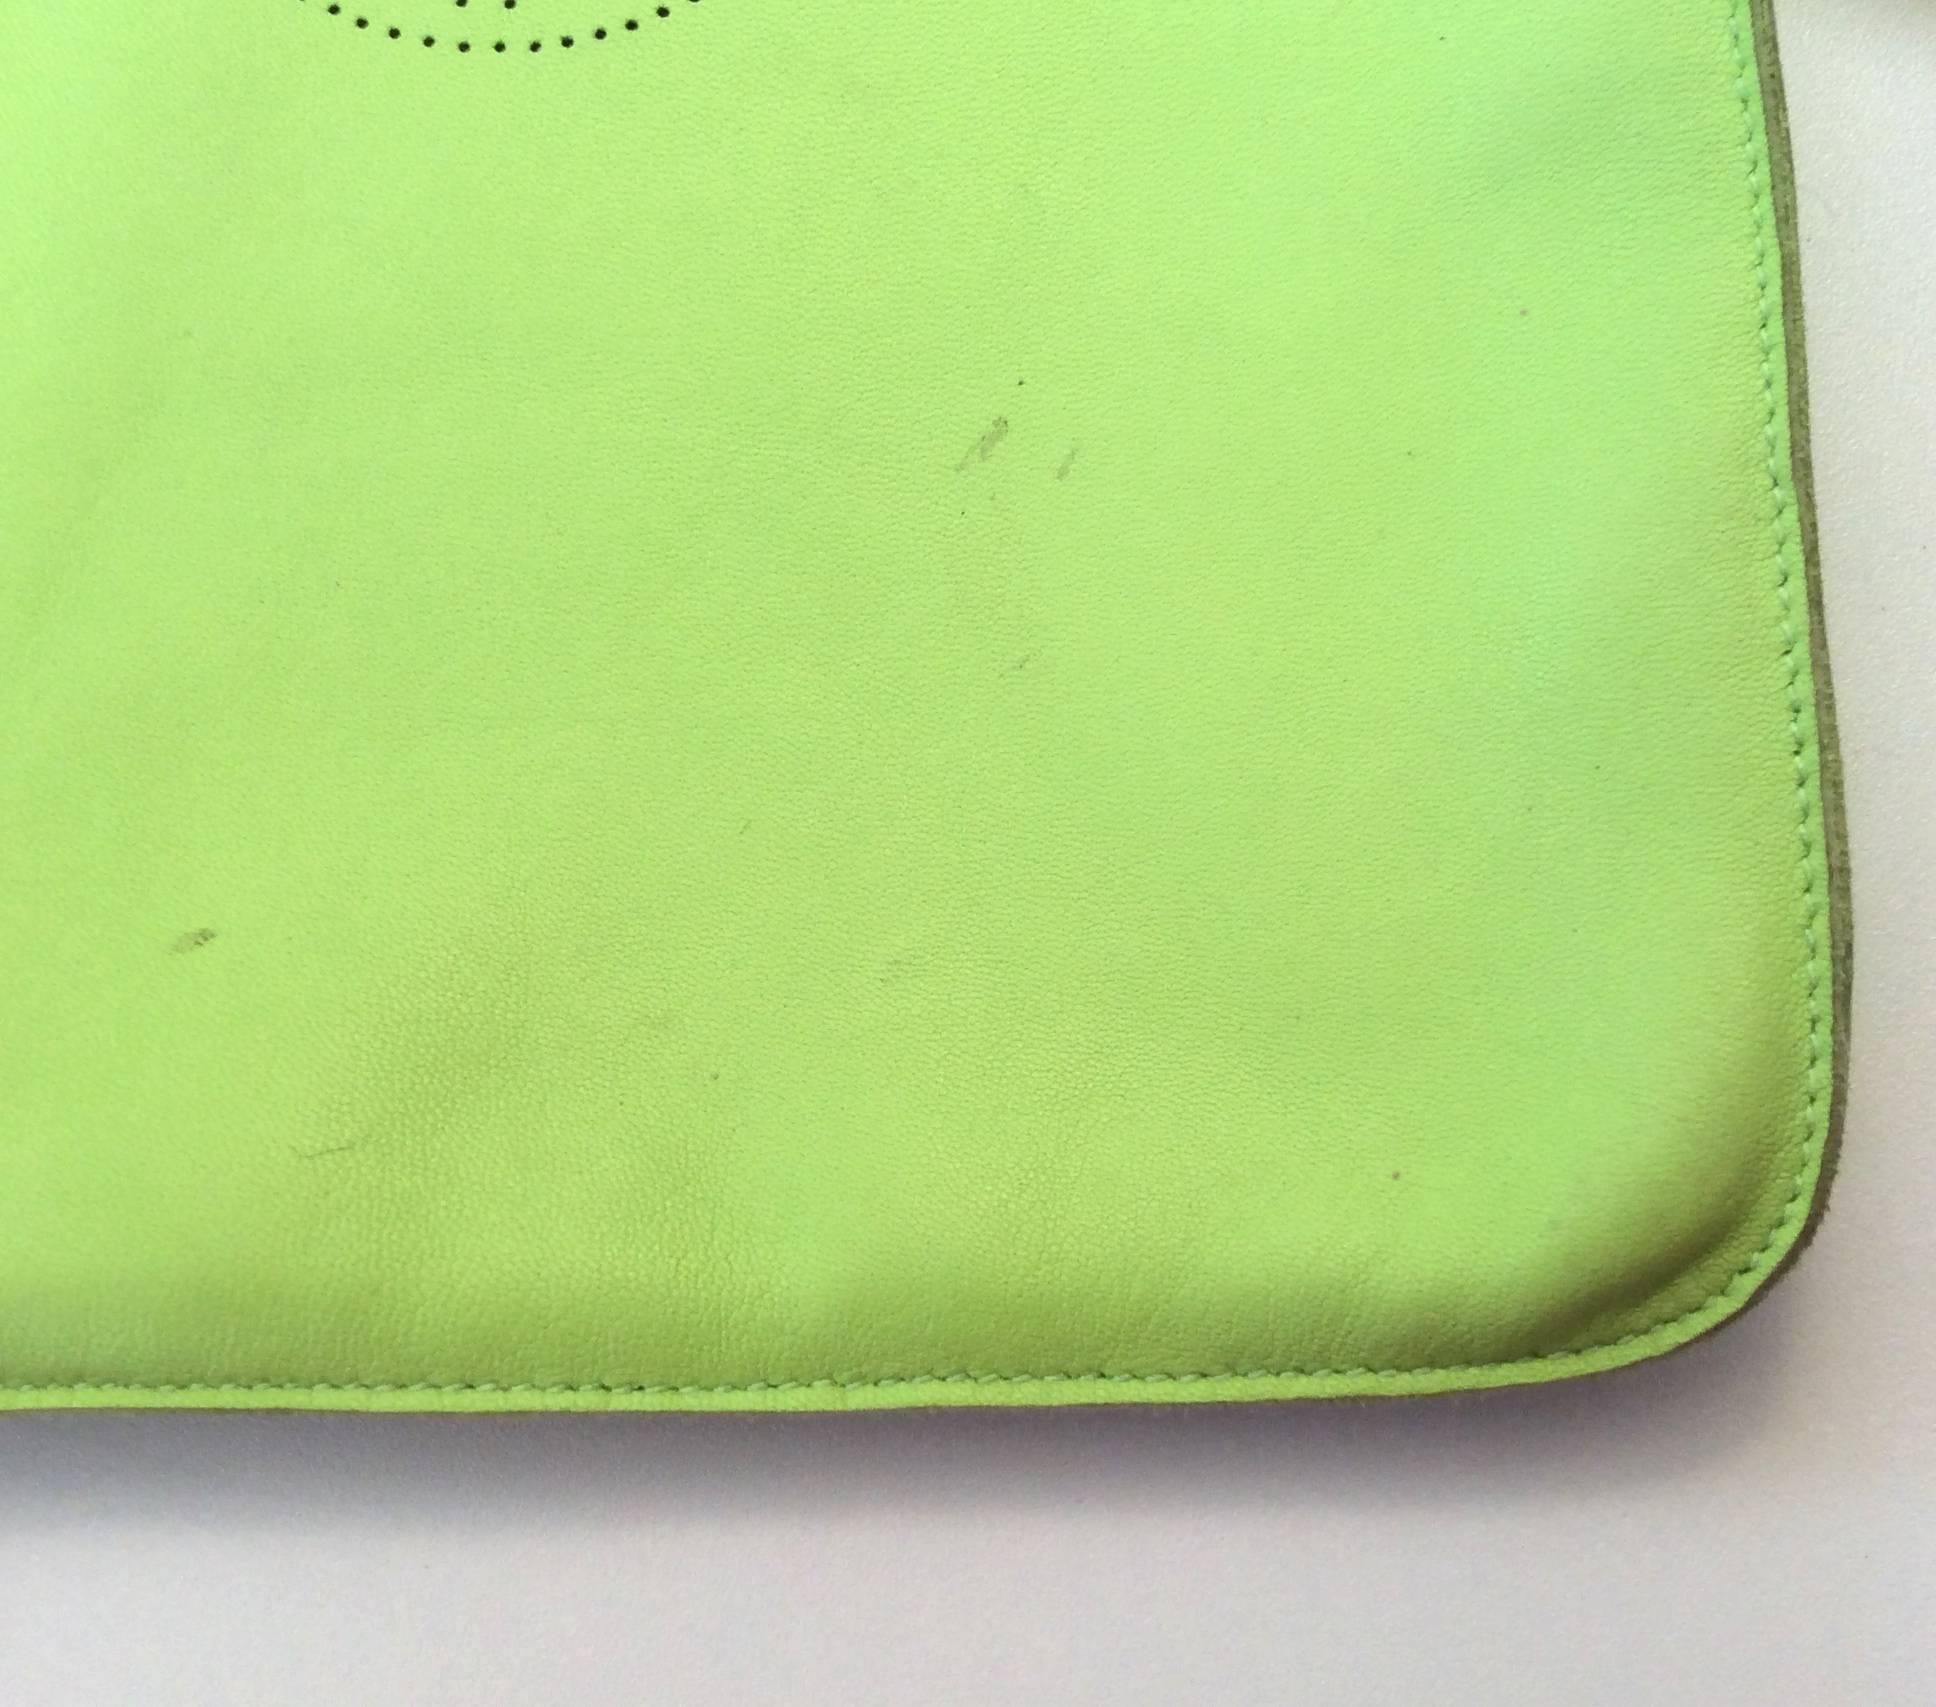 Hermes Crossbody Purse - Kiwi Green Leather  In Good Condition For Sale In Boca Raton, FL